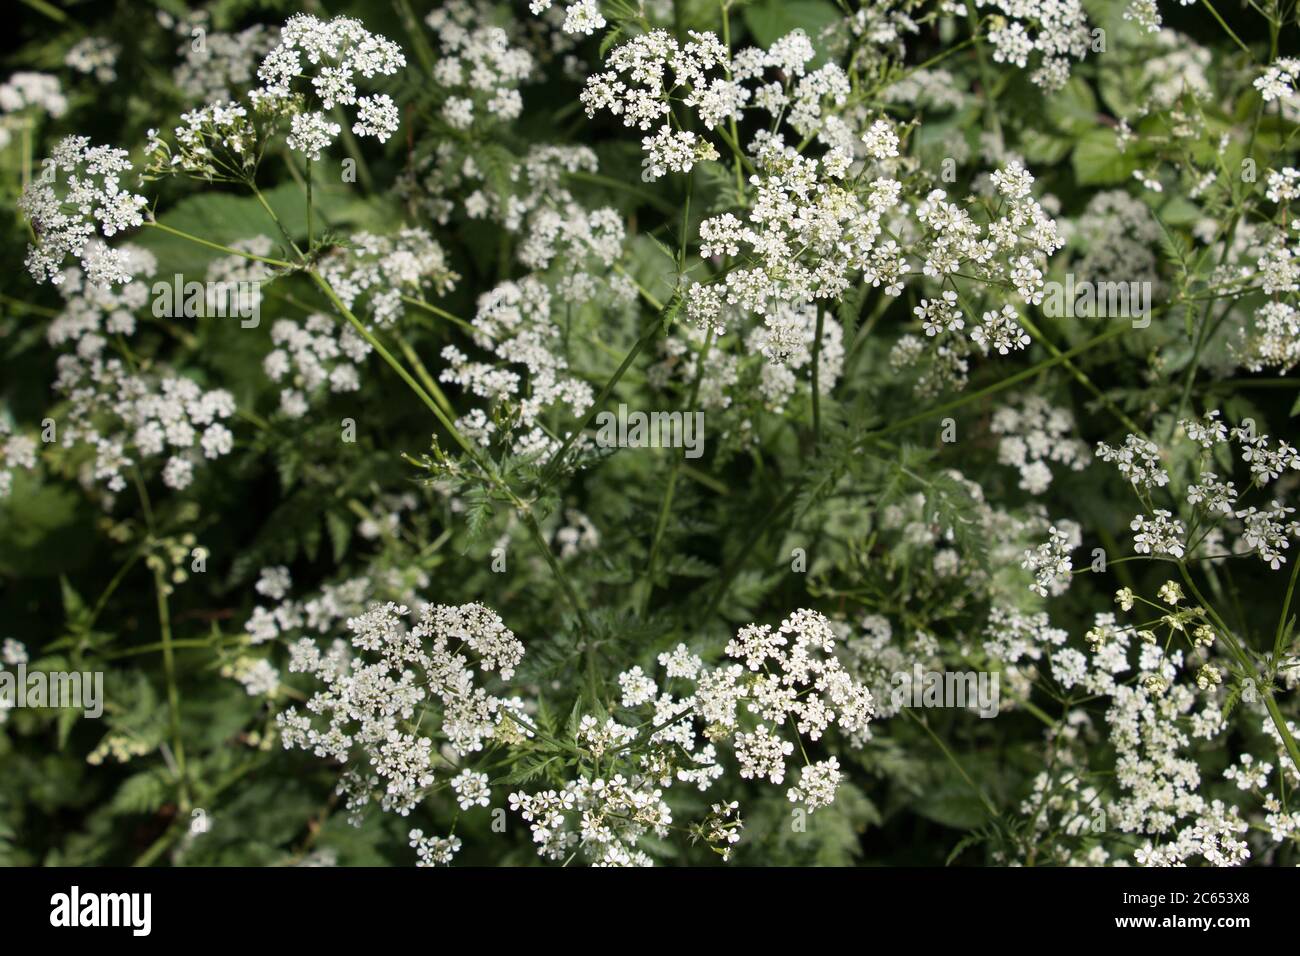 White Cow Parsley, Anthriscus sylvestris, Wild Chervil, wild Beaked Parsley or Keck, flowering in the British countryside Stock Photo